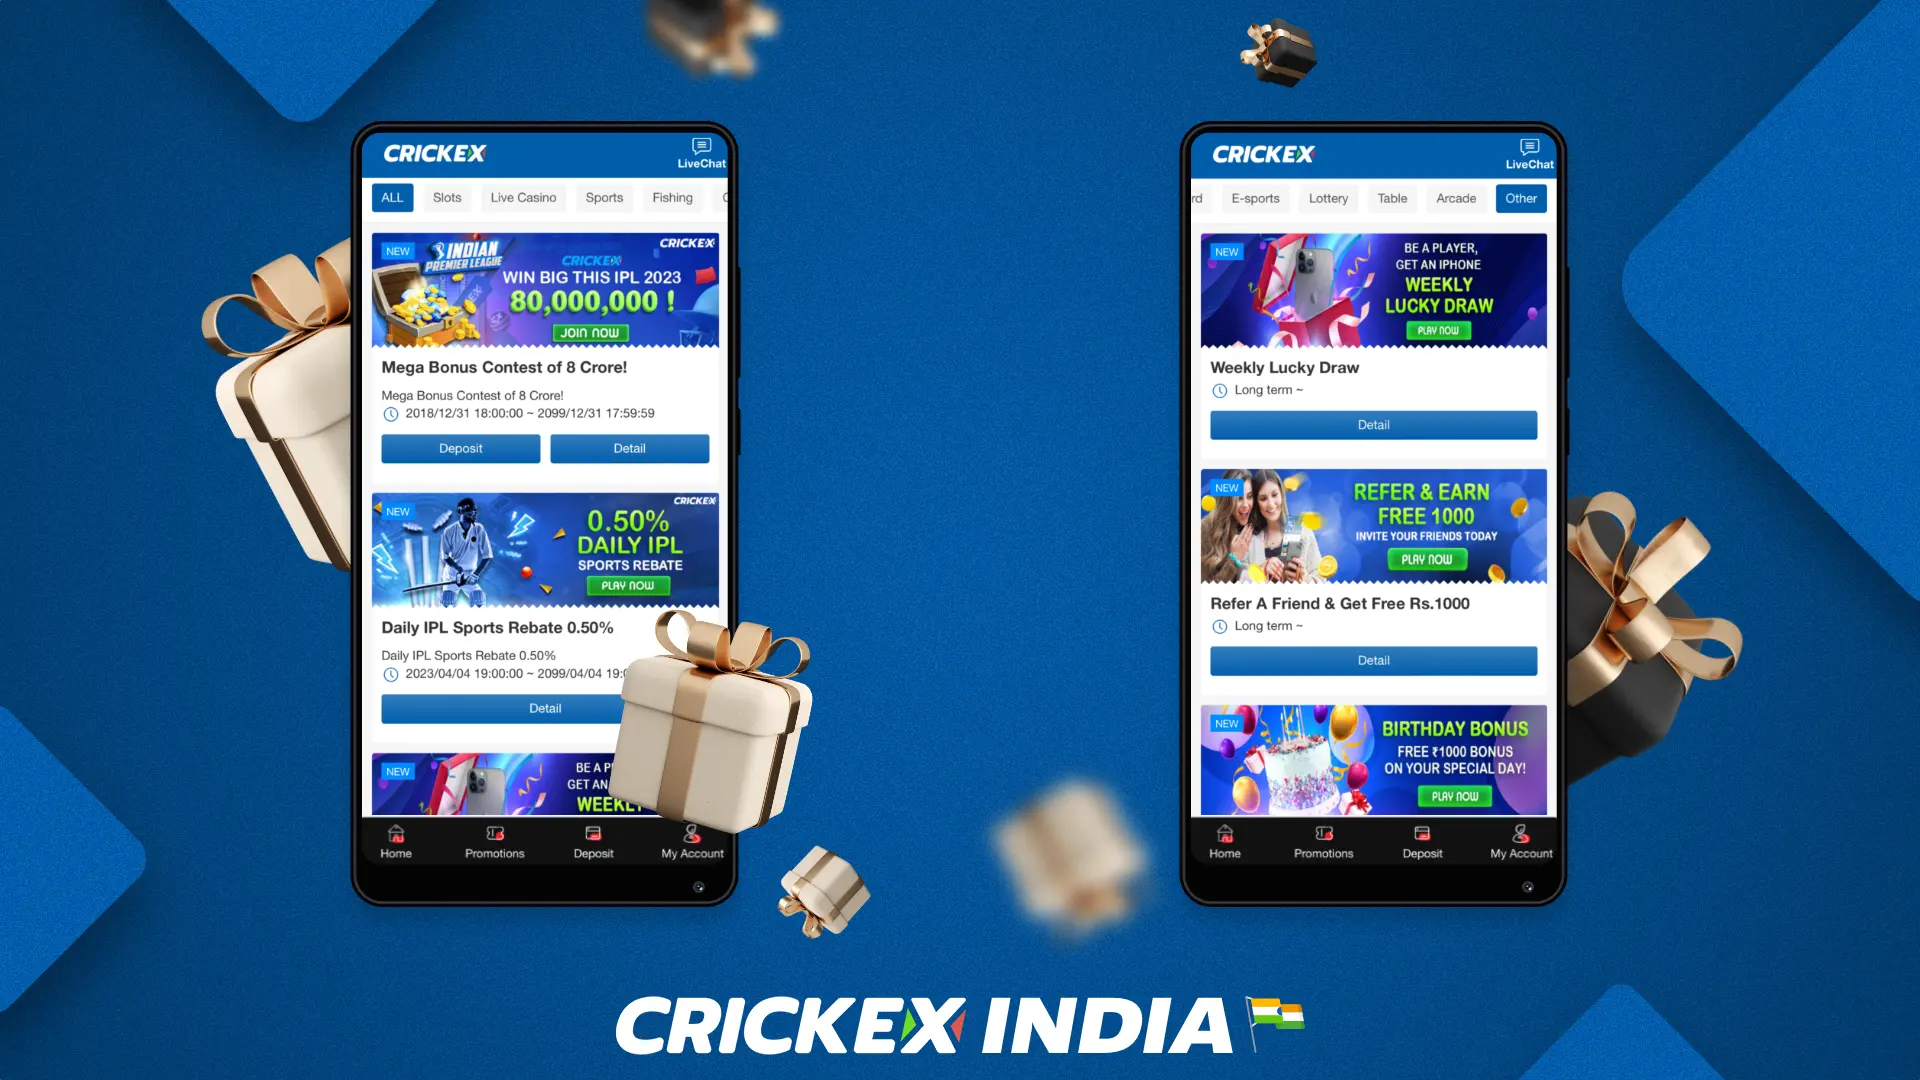 Various bonuses and promotions are available to Crickex mobile app users